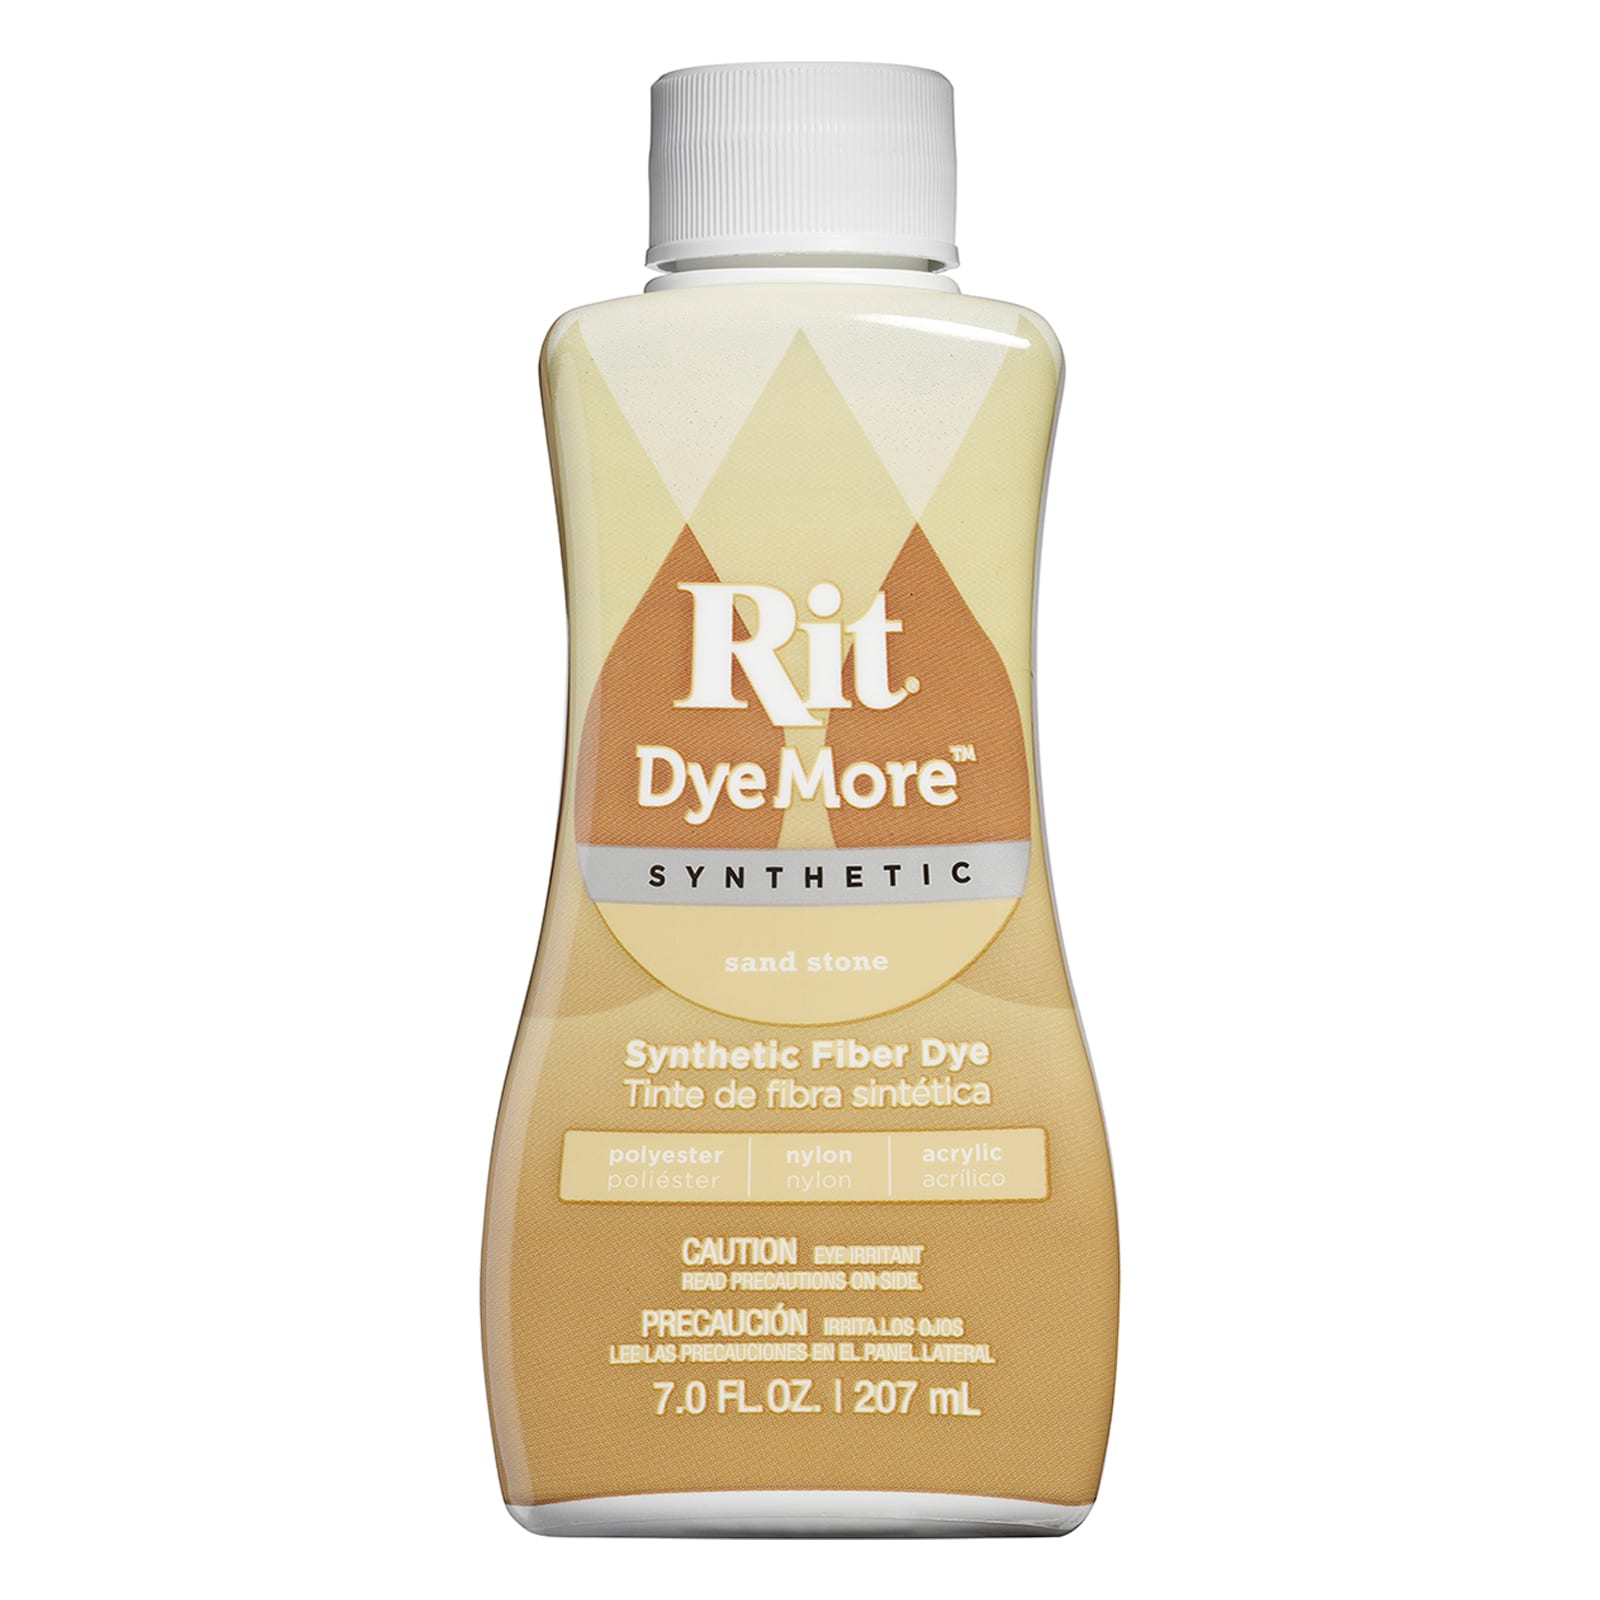 Rit DyeMore | Synthetic 7oz Liquid 12-Pack Case - Graphite